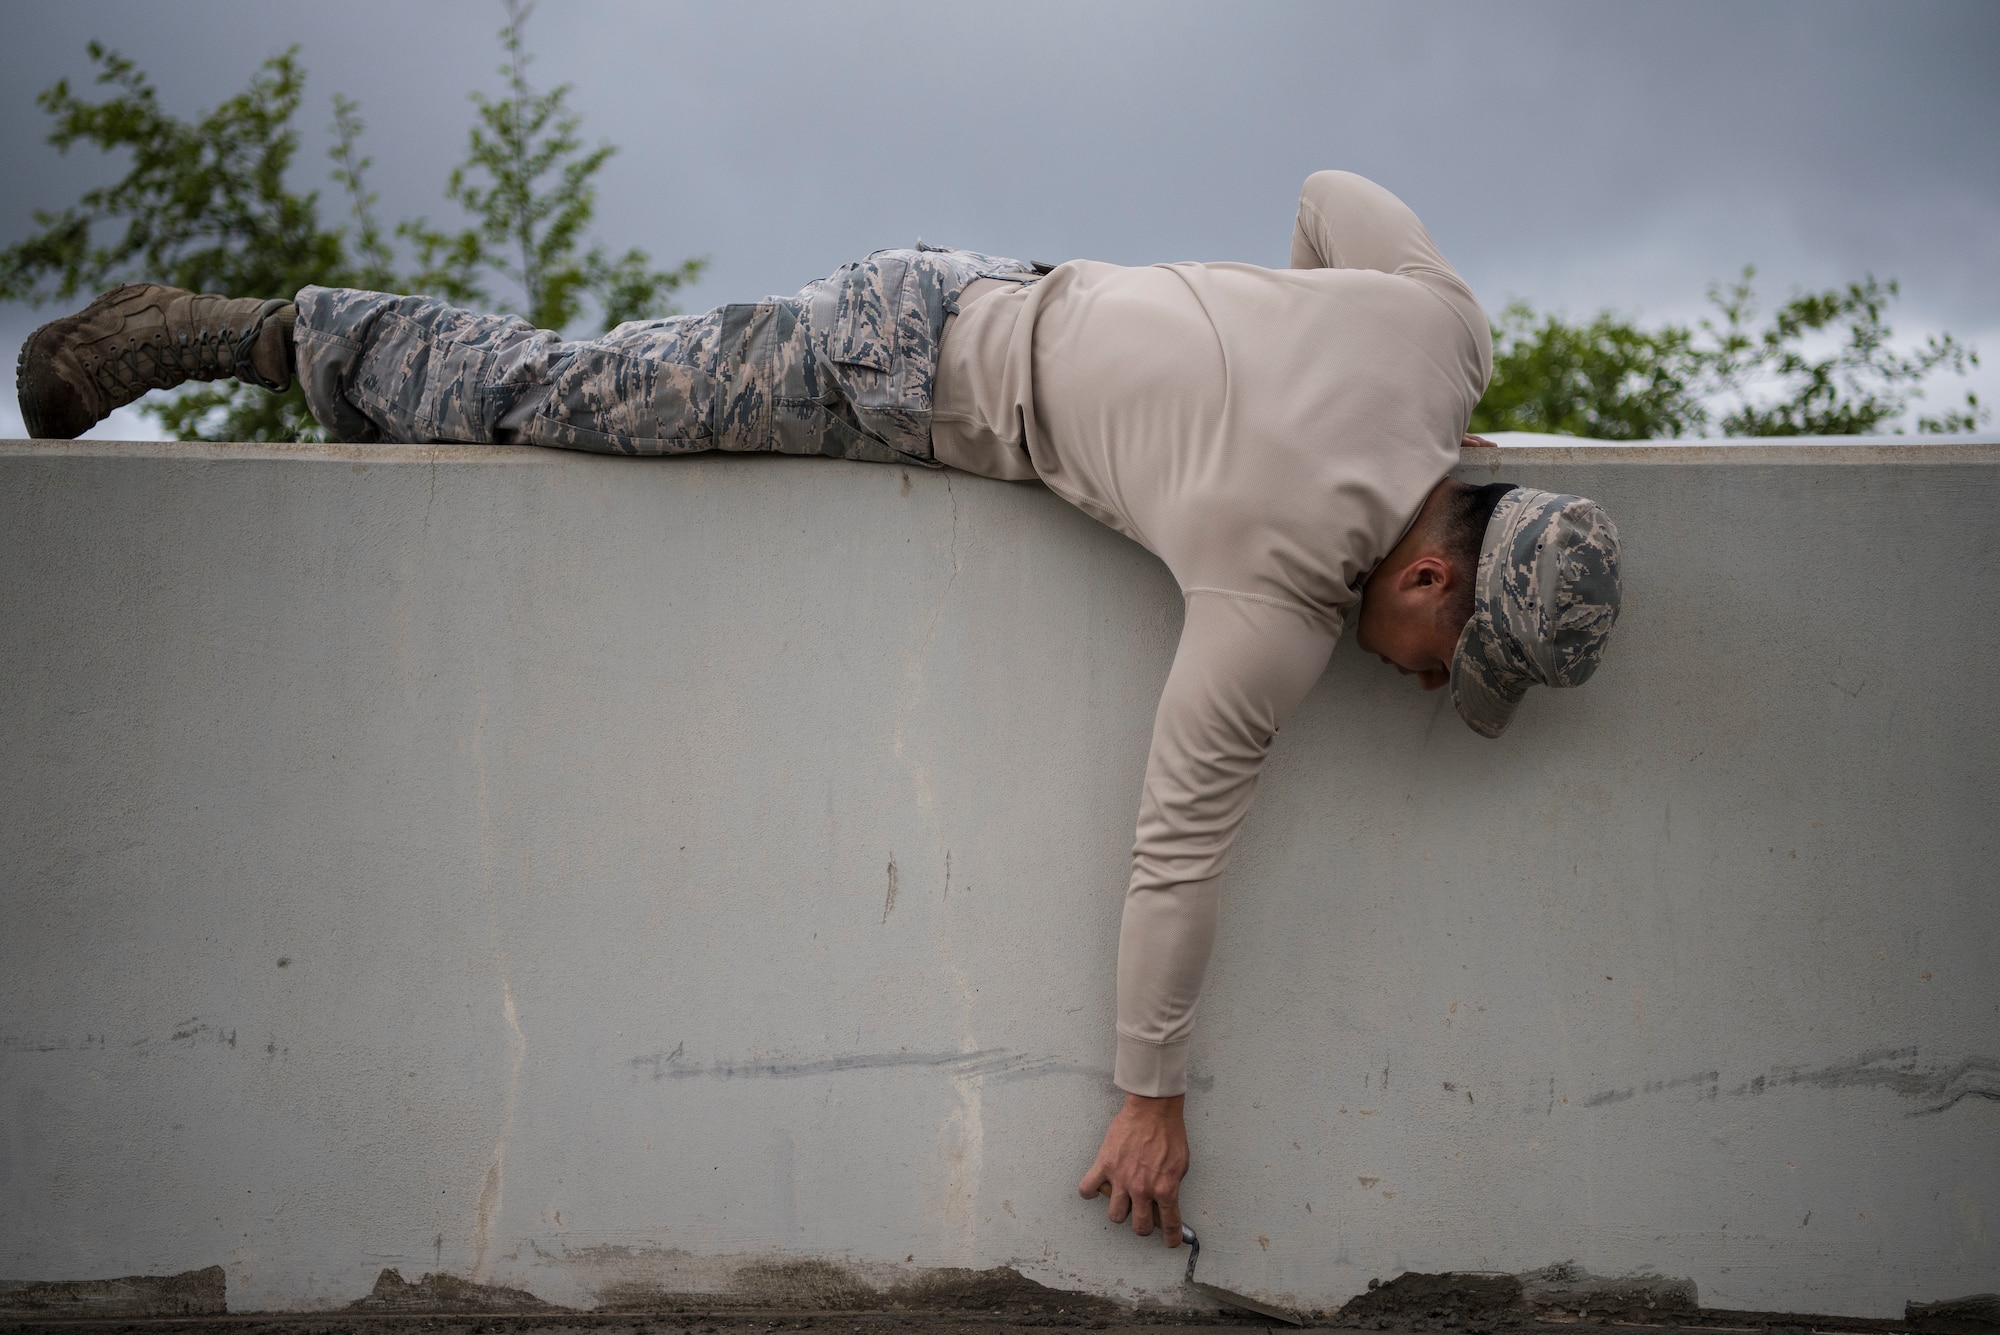 Senior Airman Noah Matsuura, 30th Civil Engineering Squadron Airman, evens out wet concrete April 3, 2019, at Vandenberg Air Force Base, Calif. Matsuura helps maintain Vandenberg AFB and provide repairs and upgrades when needed. (U.S. Air Force photo by Airman 1st Class Hanah Abercrombie)